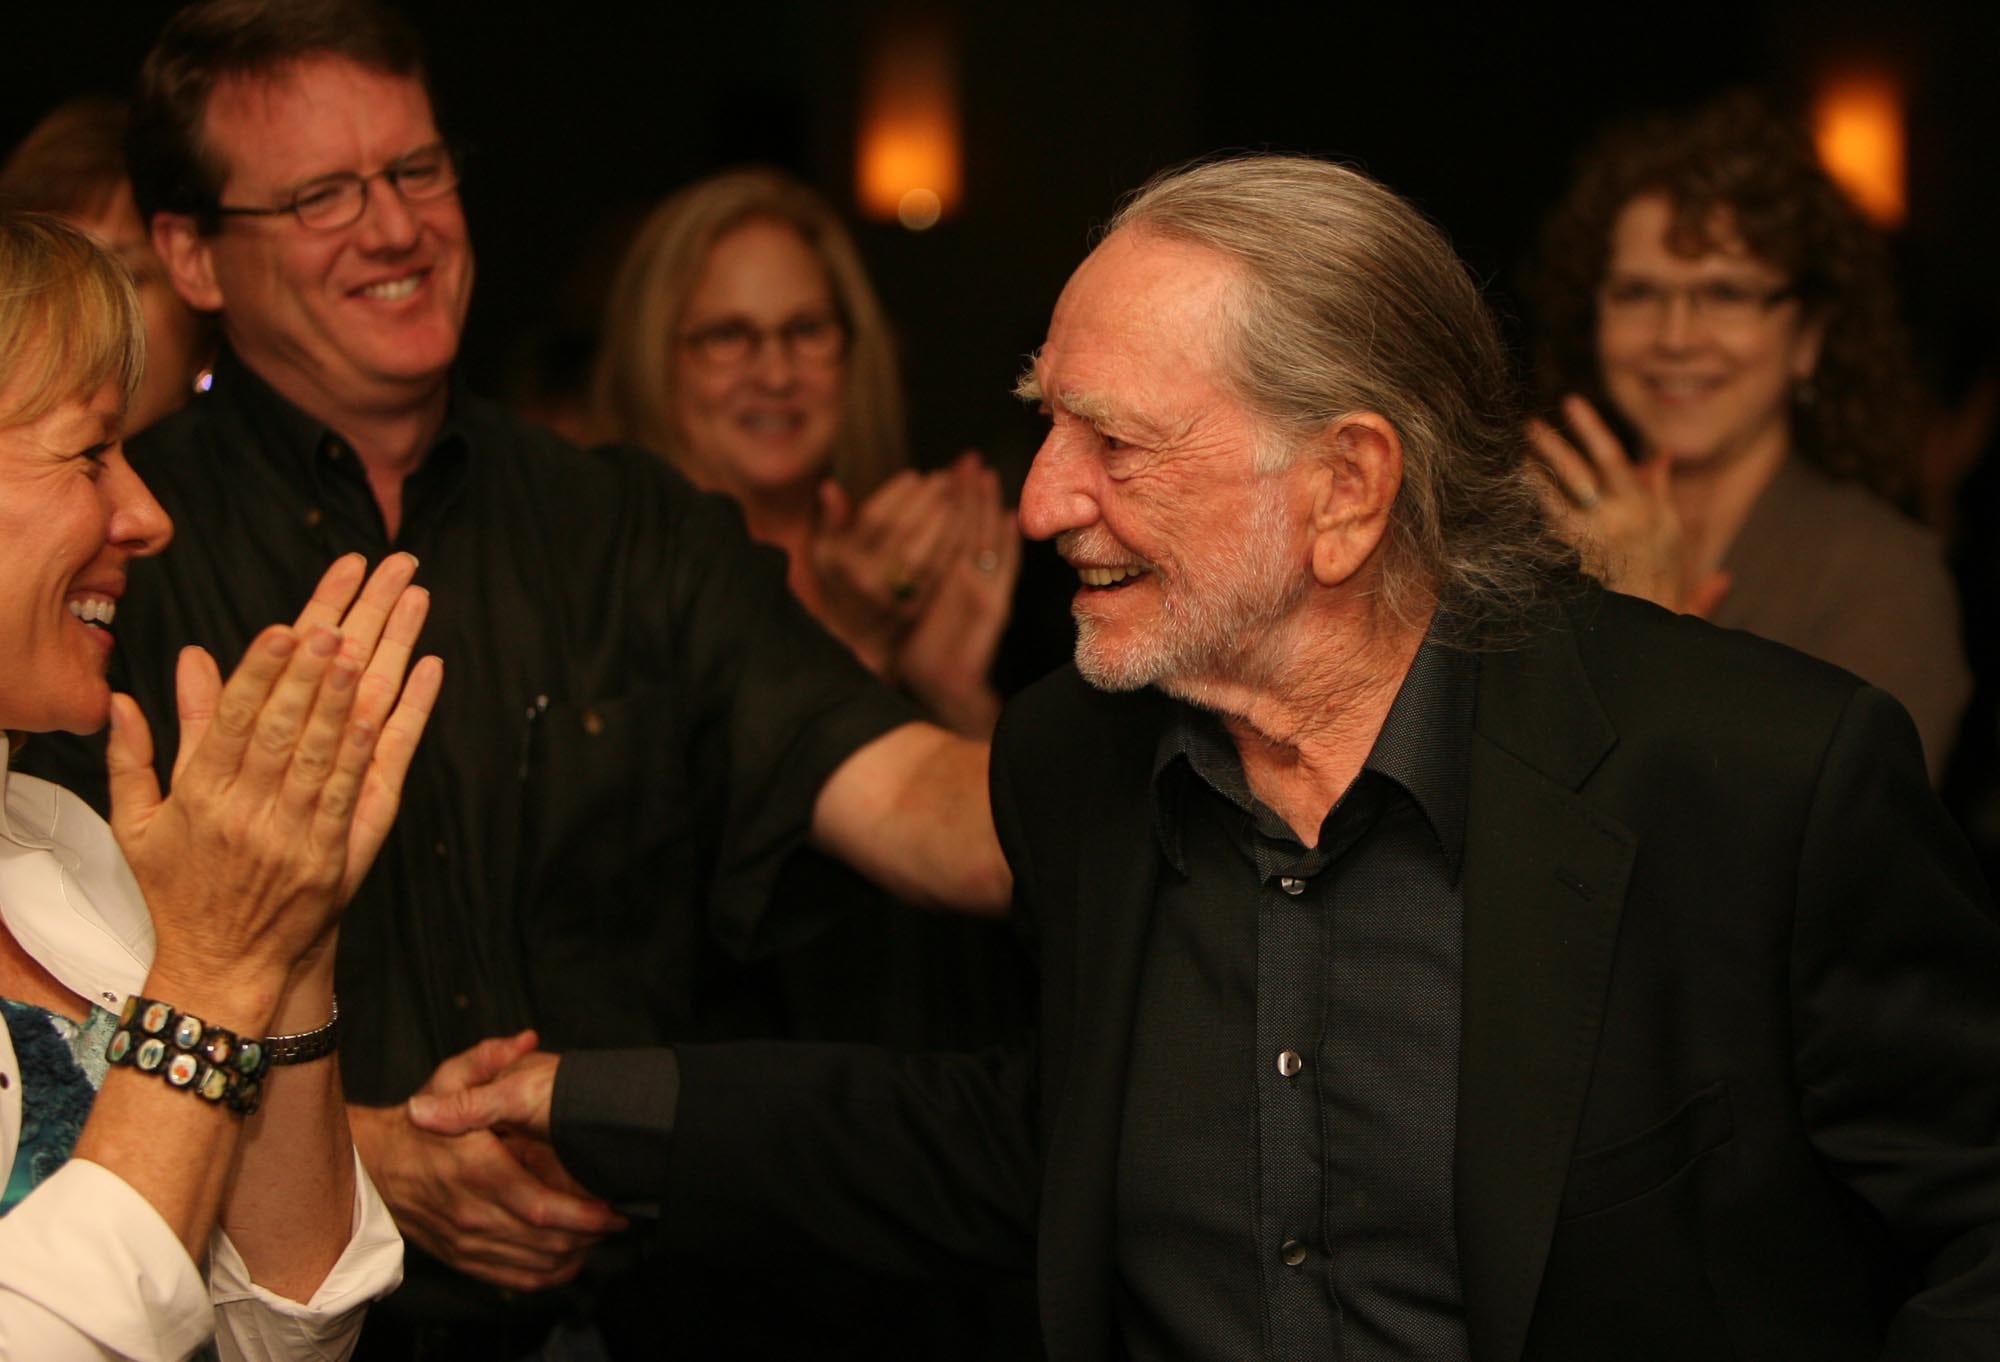 Willie Nelson is congratulated as he walks up to accept the Bridging Divides Award from UT's Project on Conflict Resolution at the Frank Erwin Center on Friday Oct. 19, 2007.